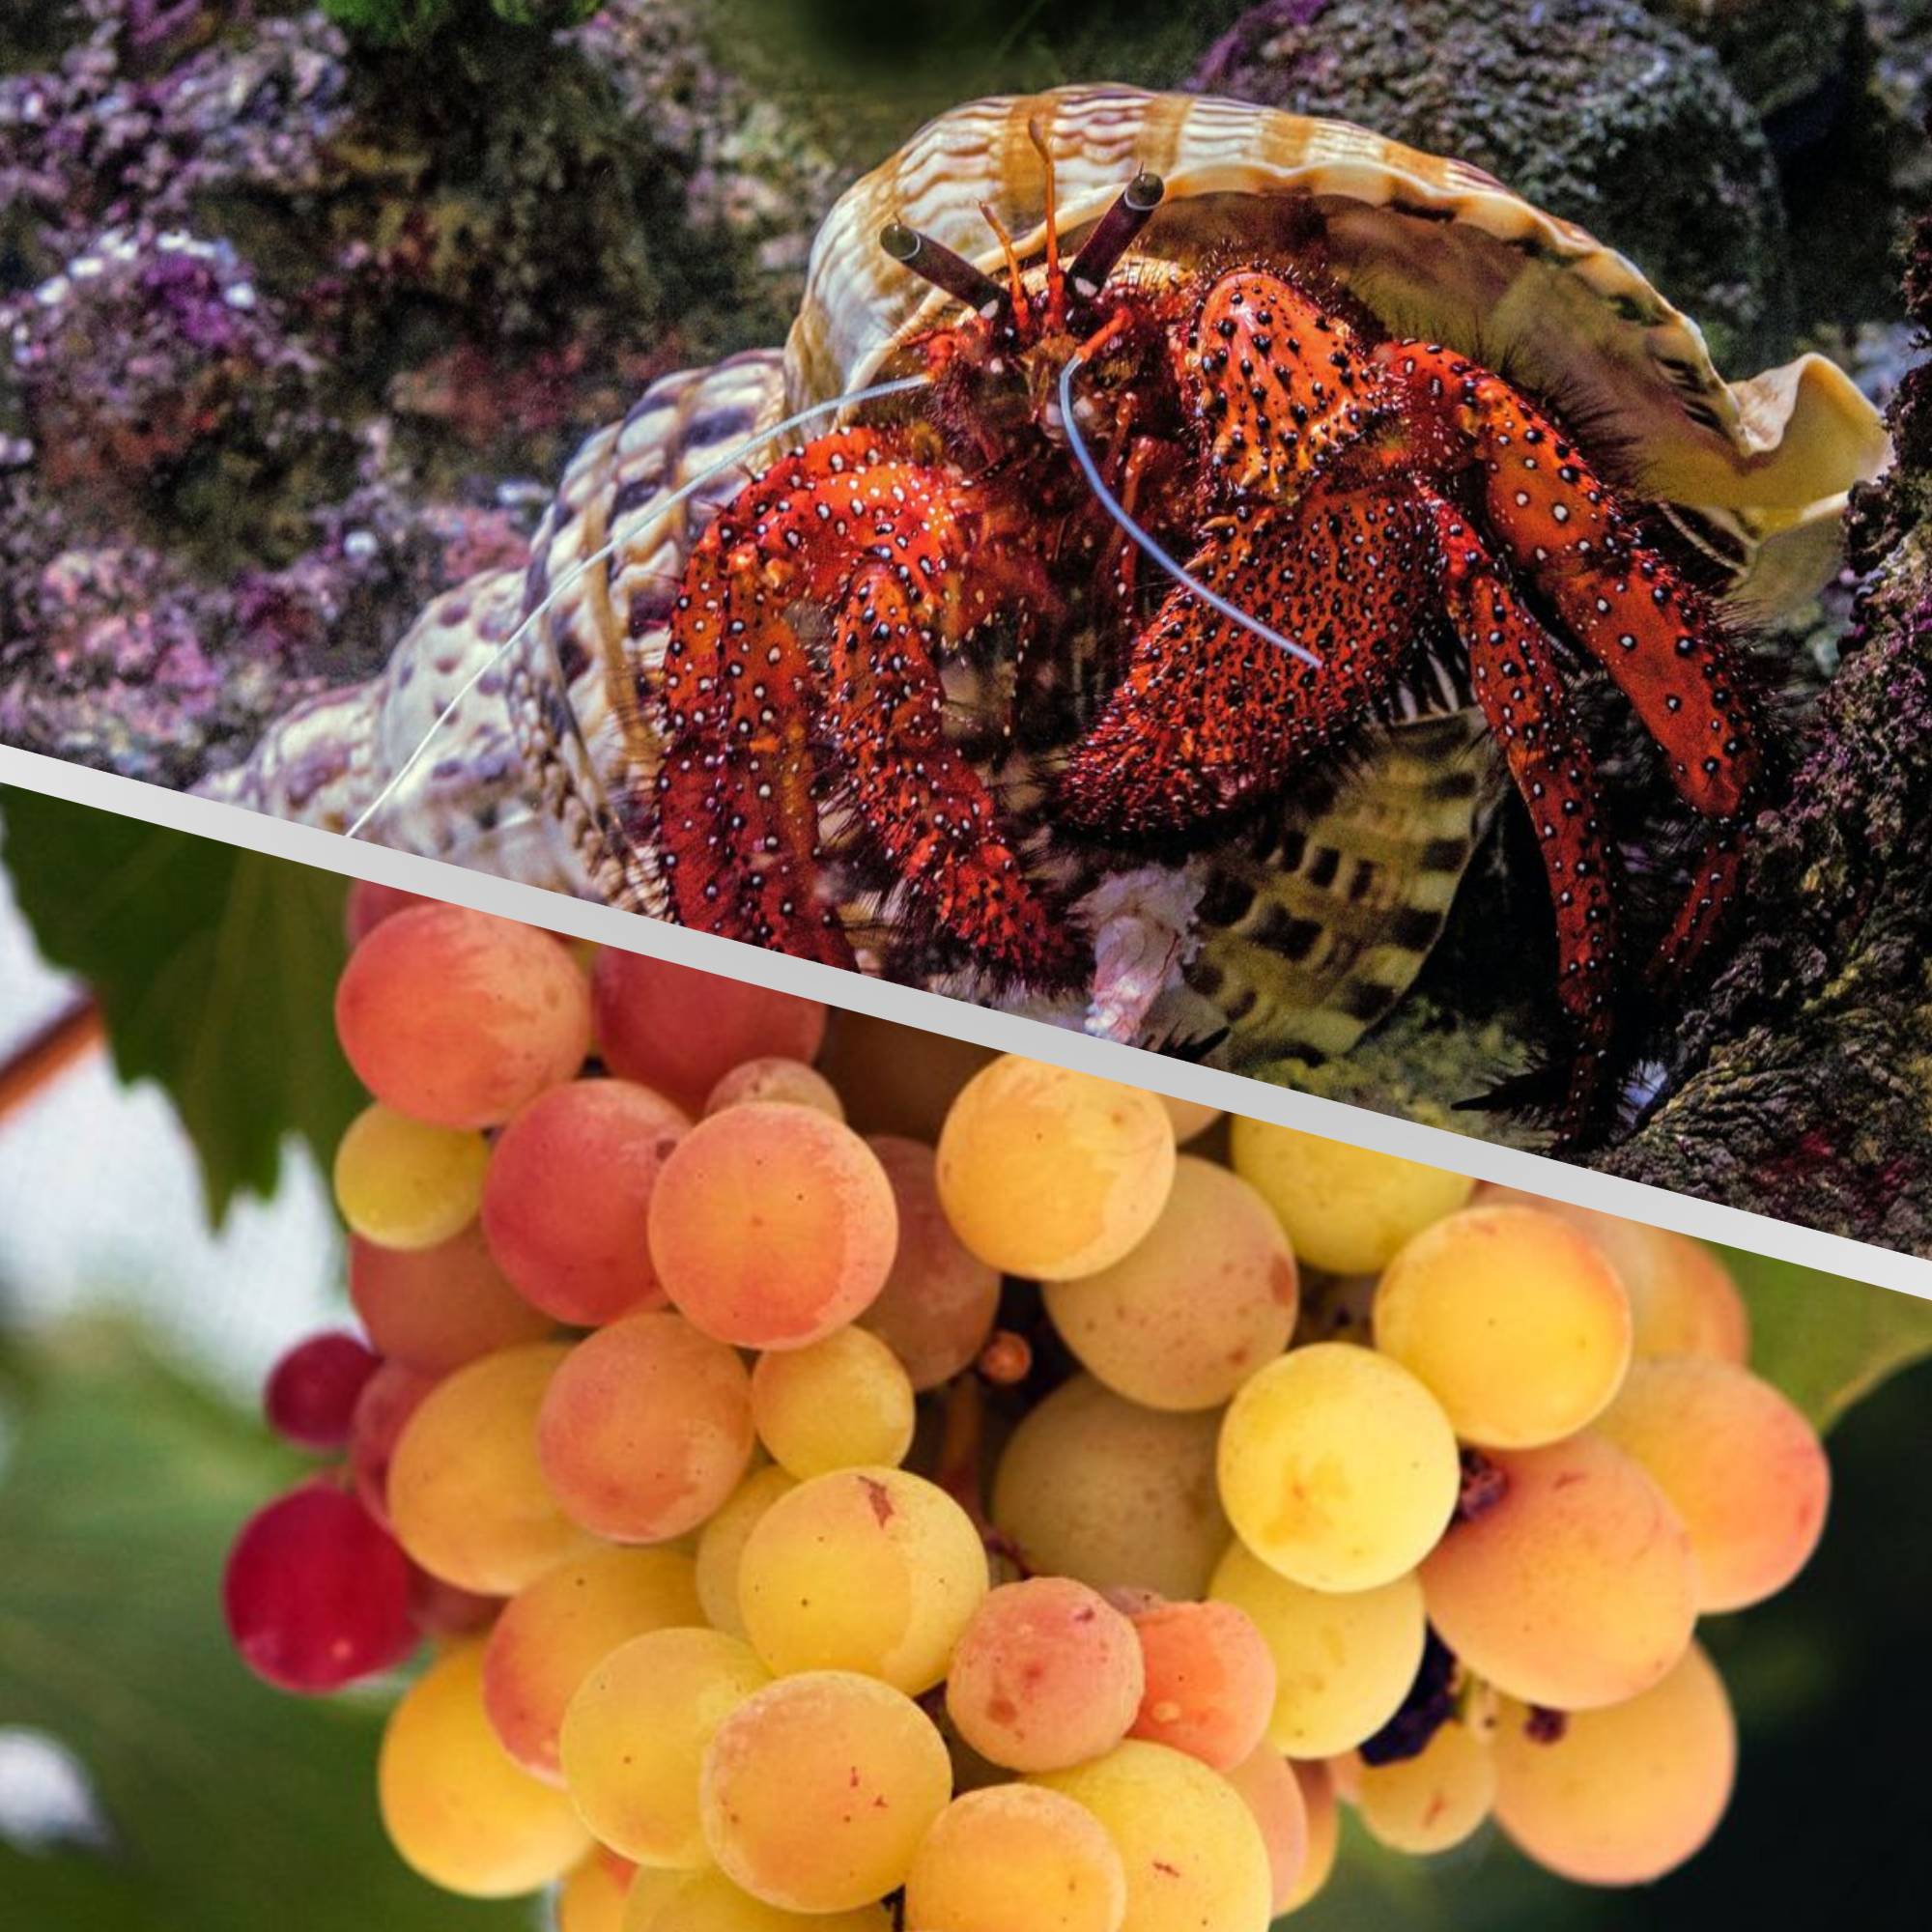 Can Hermit Crabs Eat Grapes?